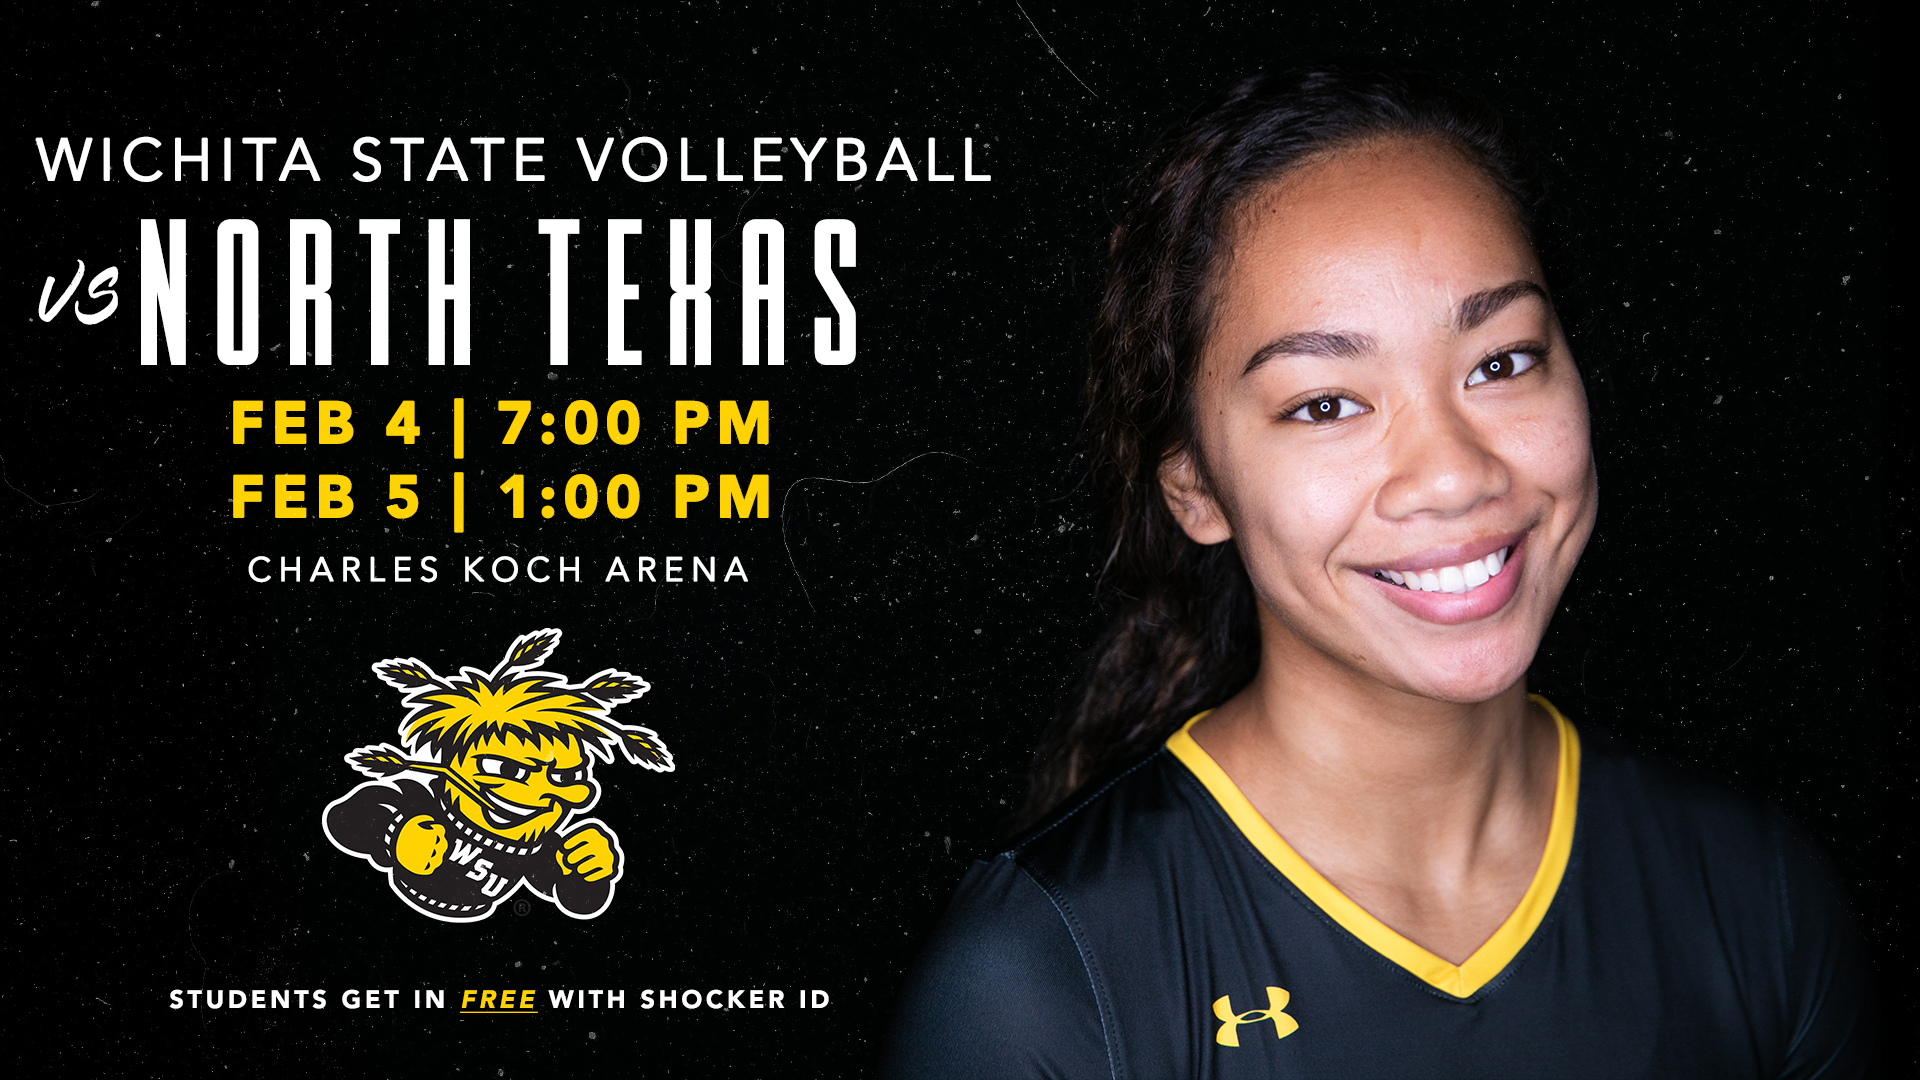 Wichita State Volleyball vs North Texas; February 4th @ 7 PM & February 5th @ 1 PM; Charles Koch Arena; Students get in free with their Shocker ID